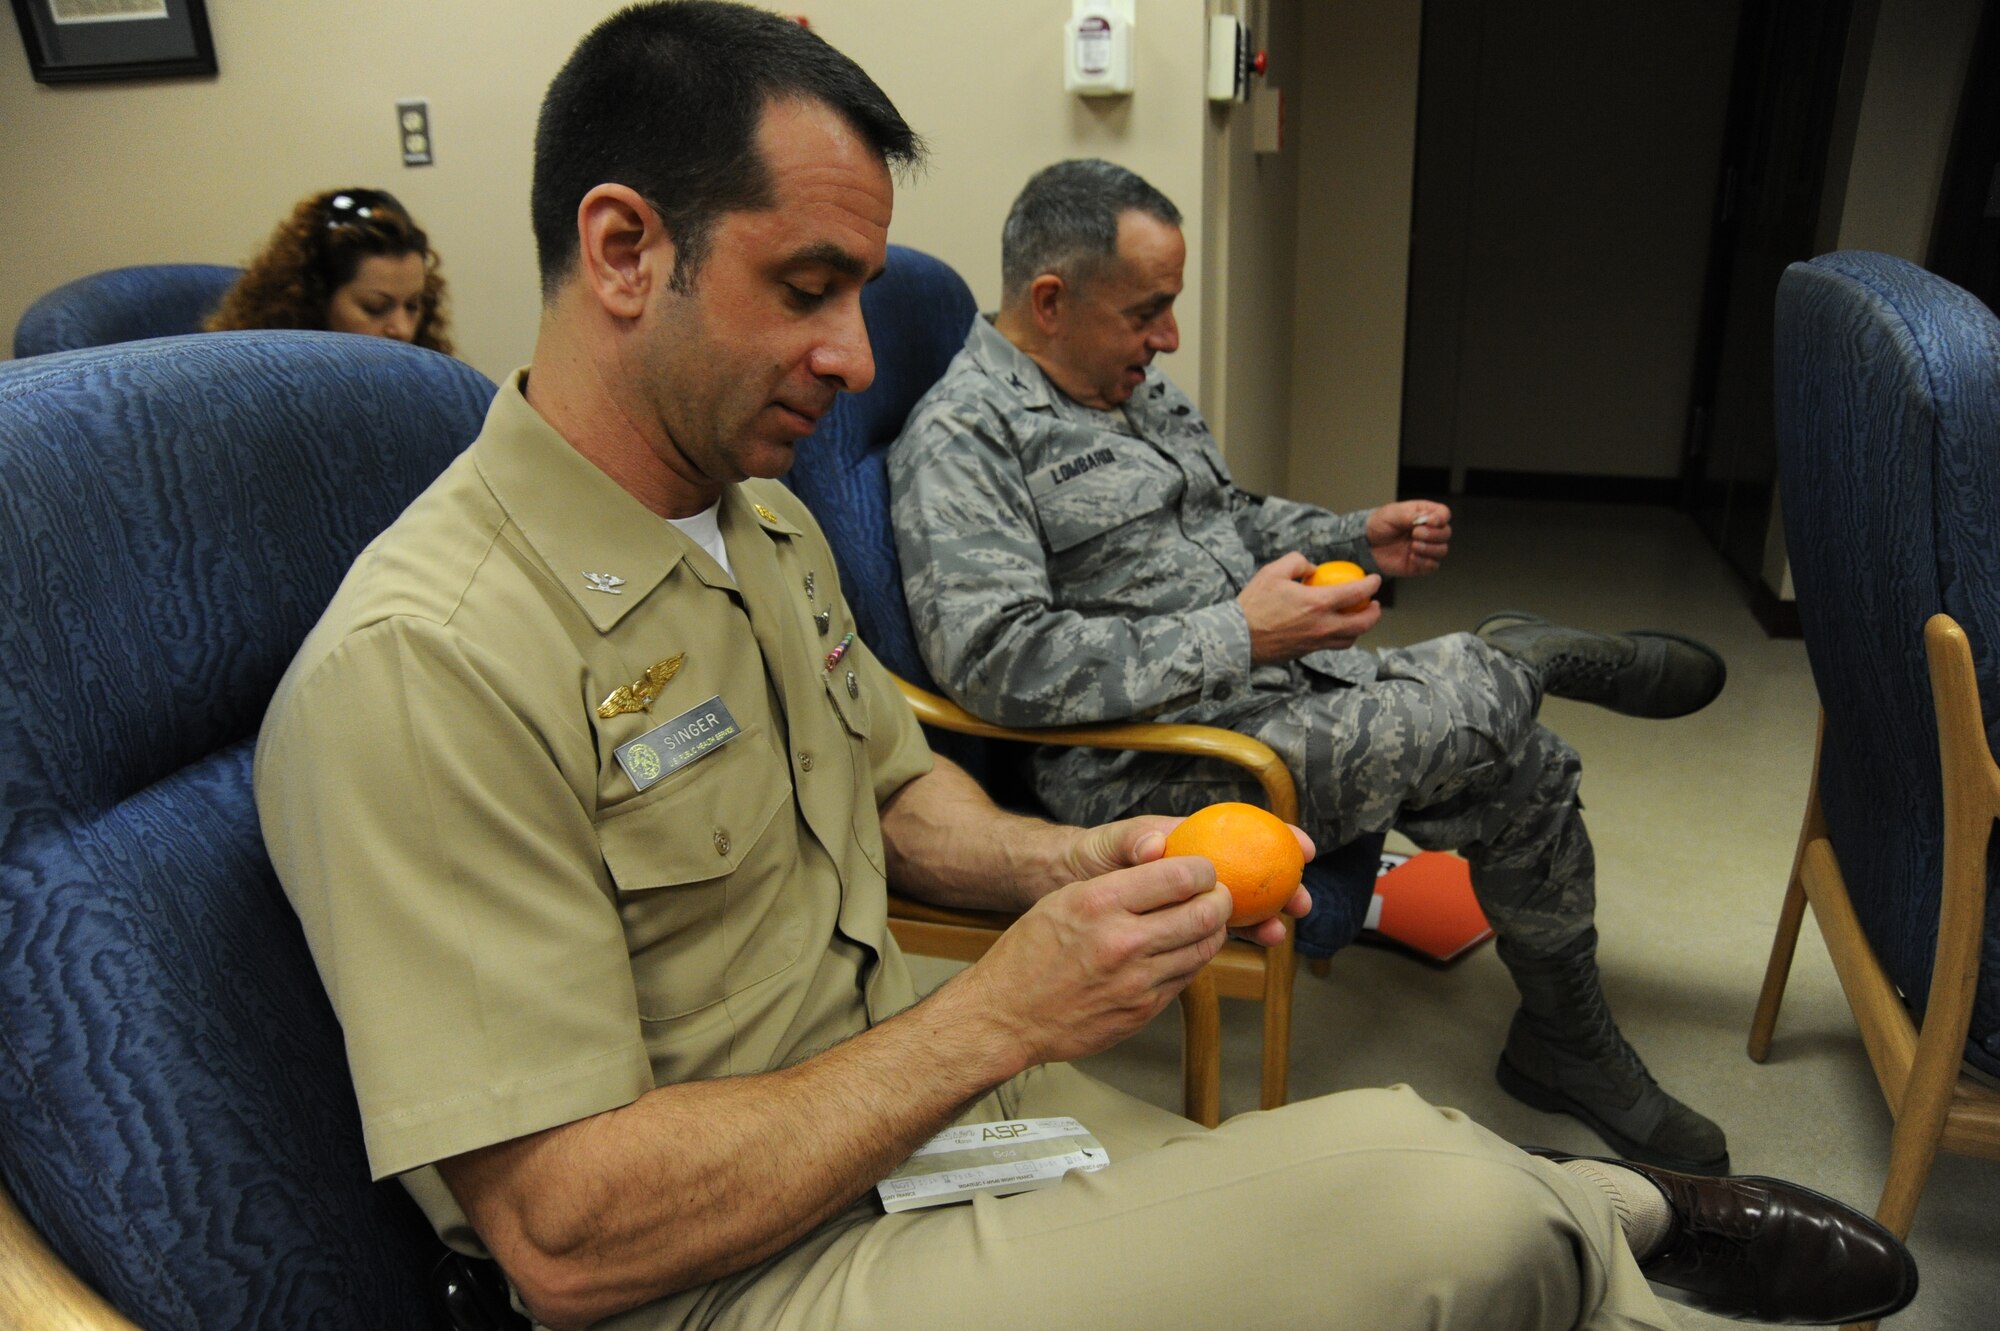 Public Health Service Capt. Darrell Singer Office of the Secretary of Defense with the National Institute of Health from the Pentagon, alongside Col. Sal Lombardi, Joint Force Headquarters Maryland National Guard state surgeon practice placing acupuncture needles into oranges during the battlefield acupuncture course at the Acupuncture Clinic here Aug. 11. . Battlefiled acupuncture is a simple easy to use technique that offers fast and effective pain relief. (U.S Air Force photo/ Bahja J. Jones) 